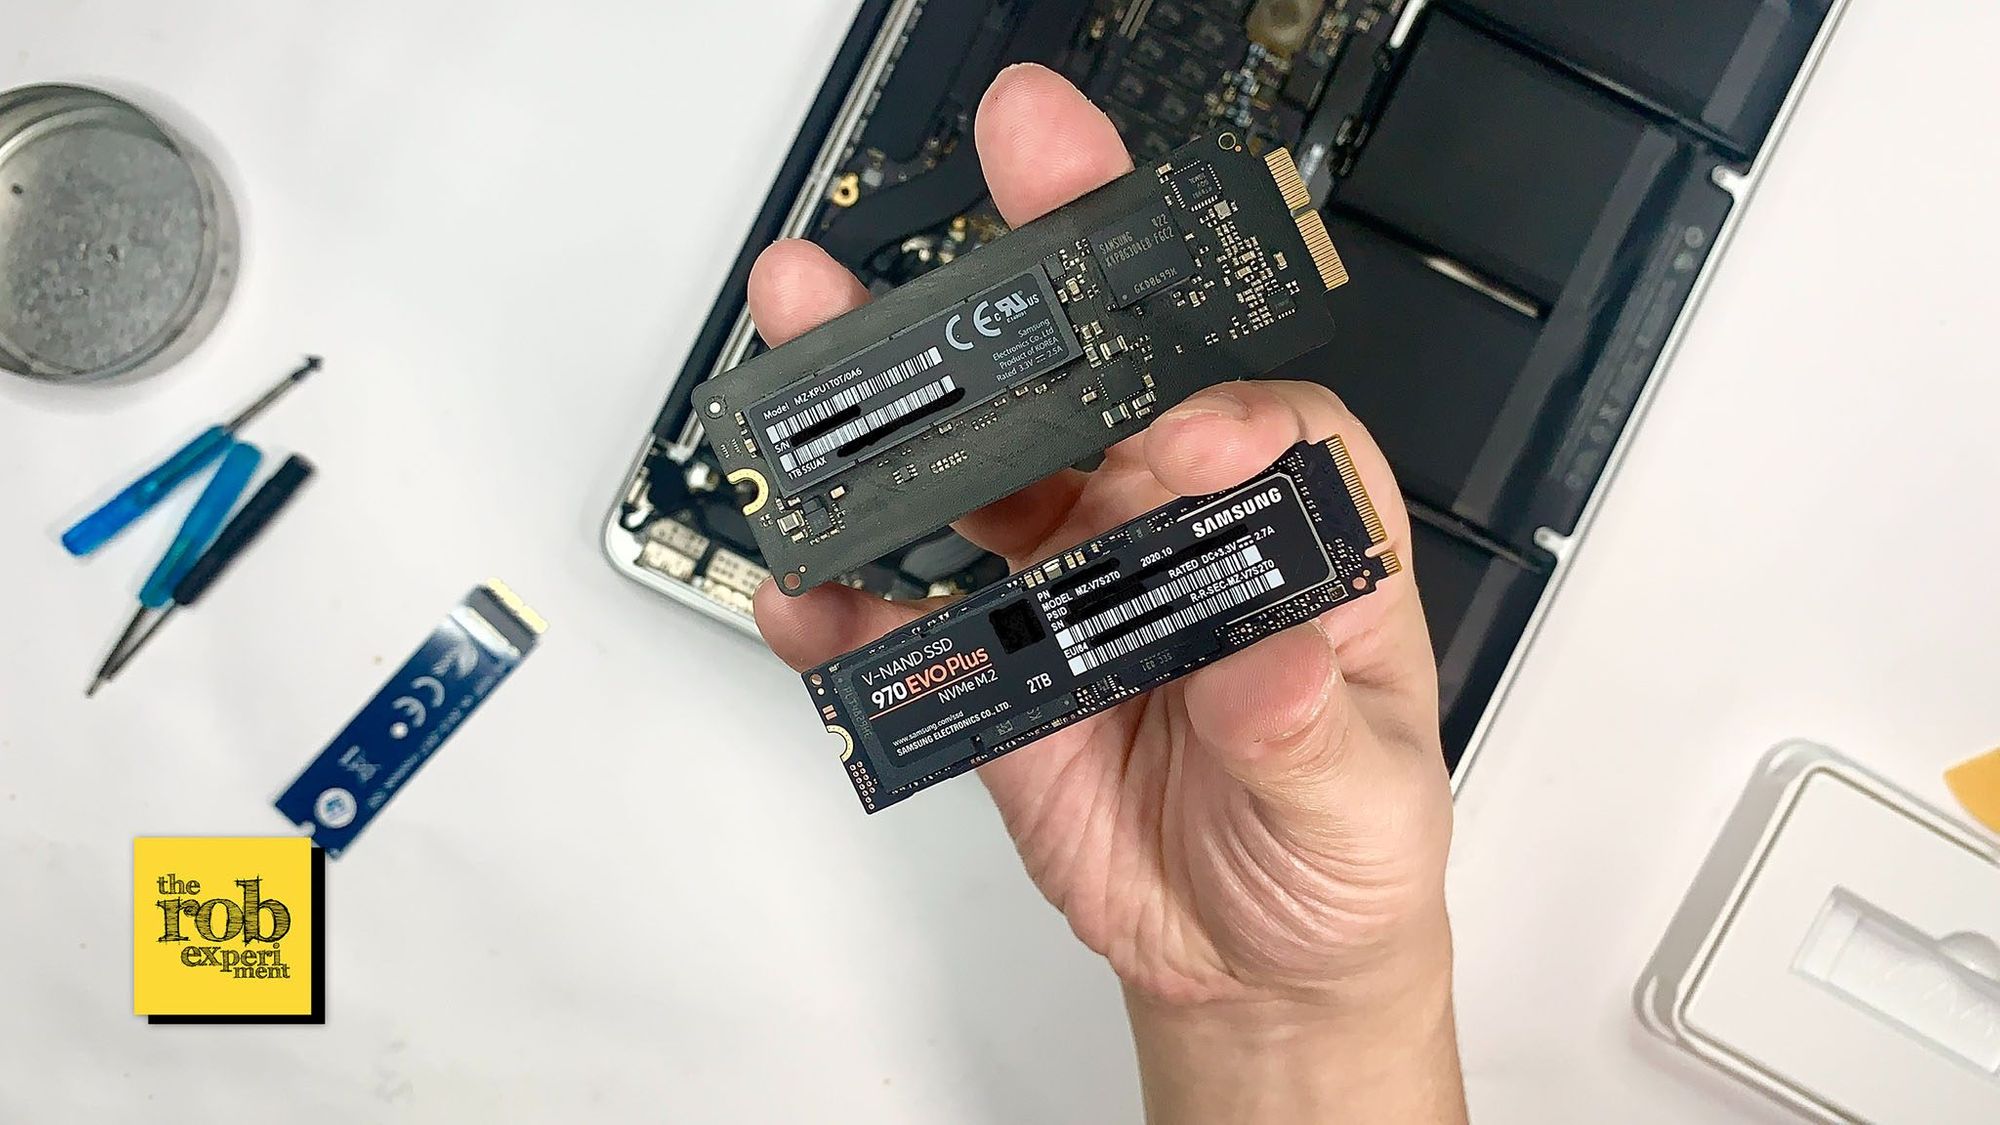 Upgrade Macbook Pro 15″ 2014 SSD To NVMe—Part 2: The Upgrade